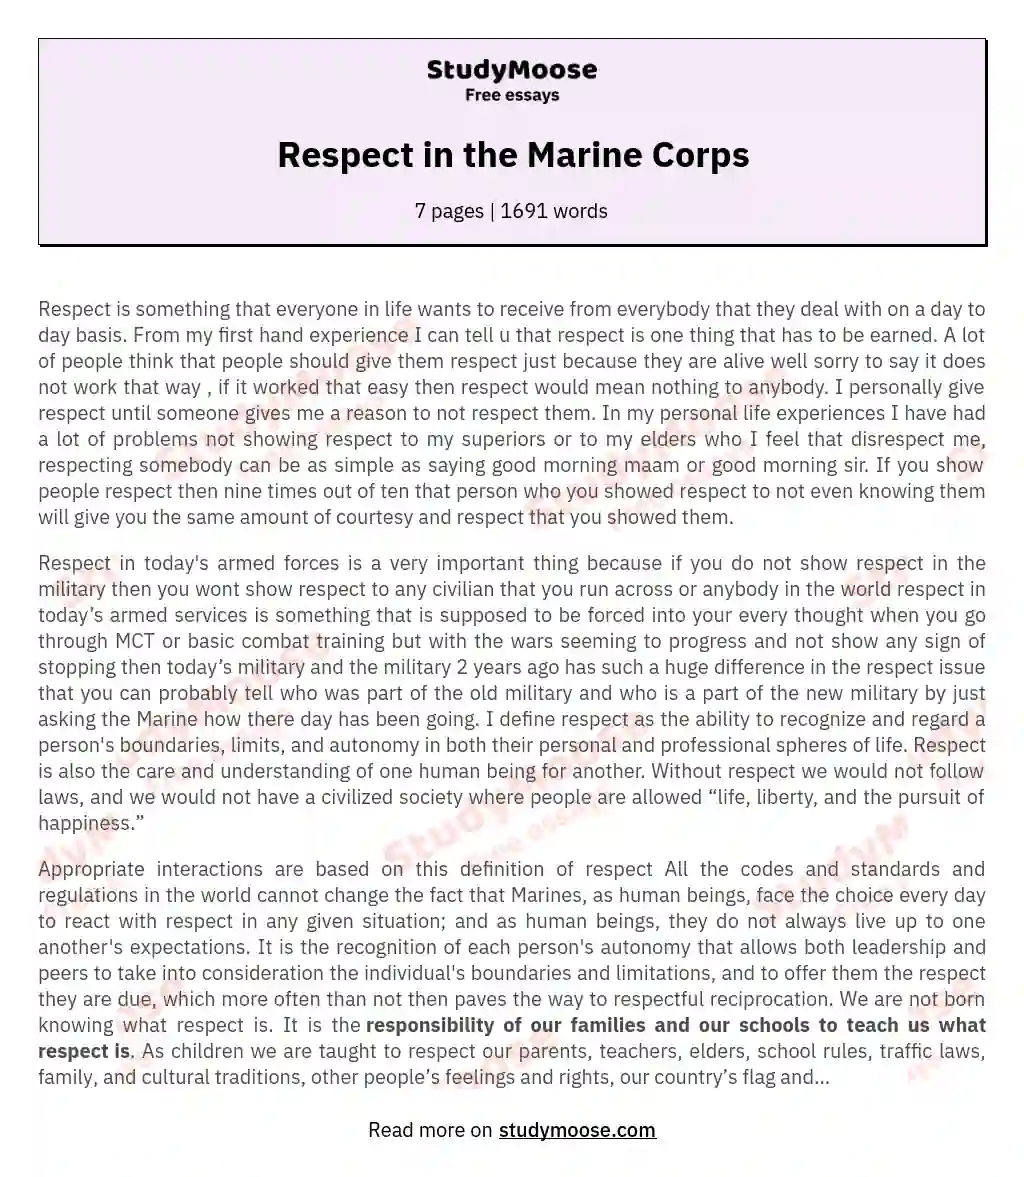 Respect in the Marine Corps essay